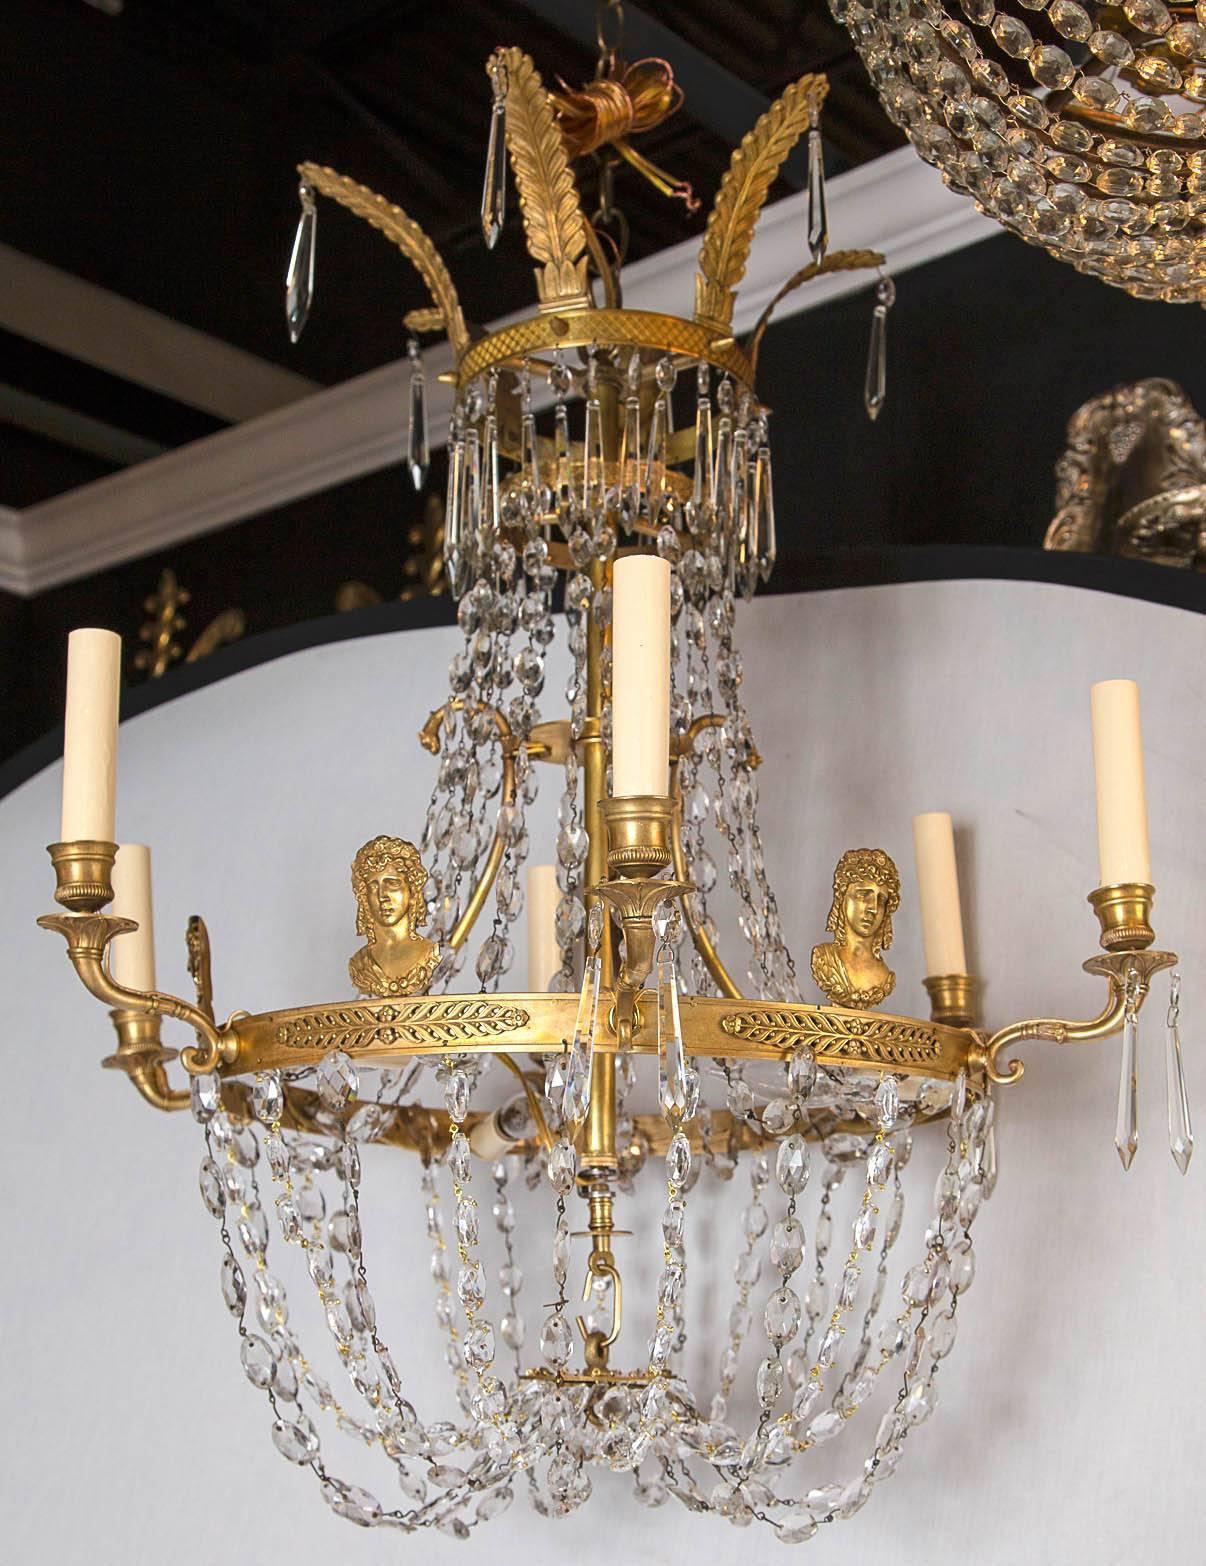 A late 19th century Swedish Empire style chandelier with crystals.